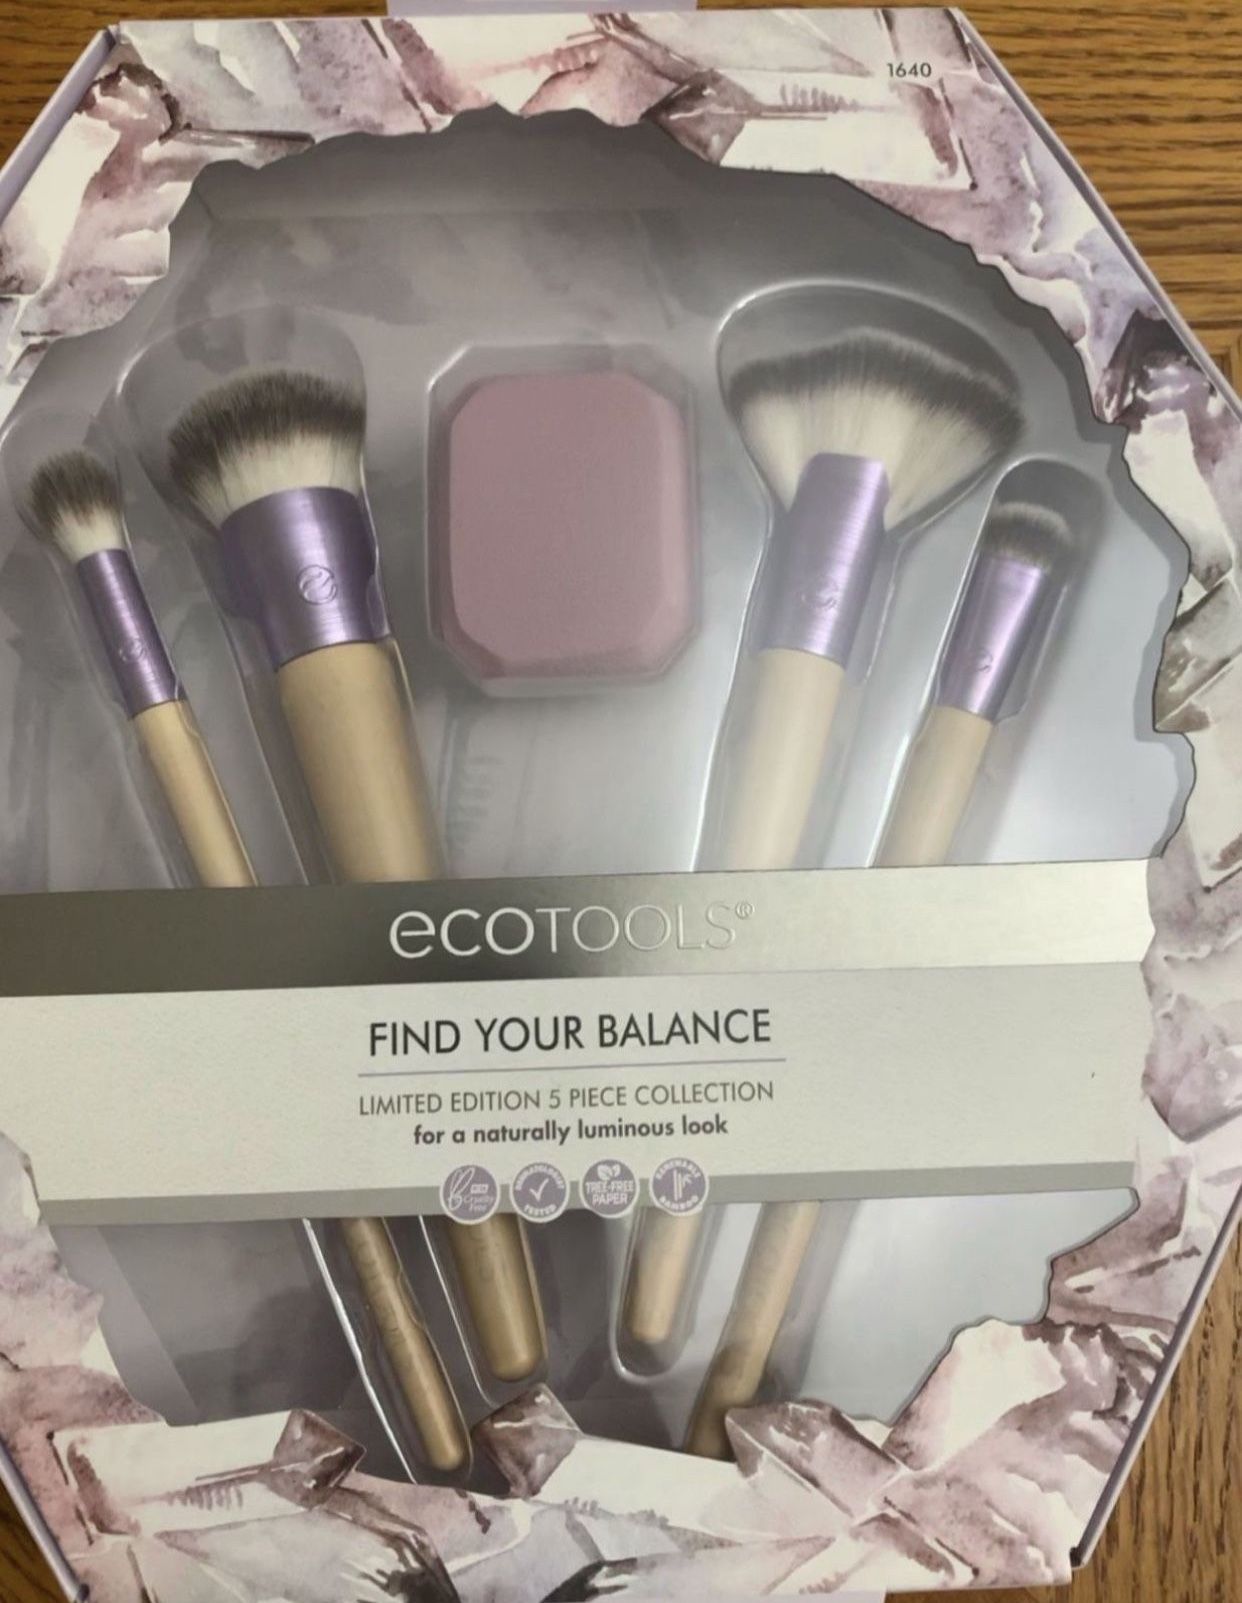 Brand new Makeup Brushes Sets $7 Each Set (Pick Up Only) Montrose and Central 